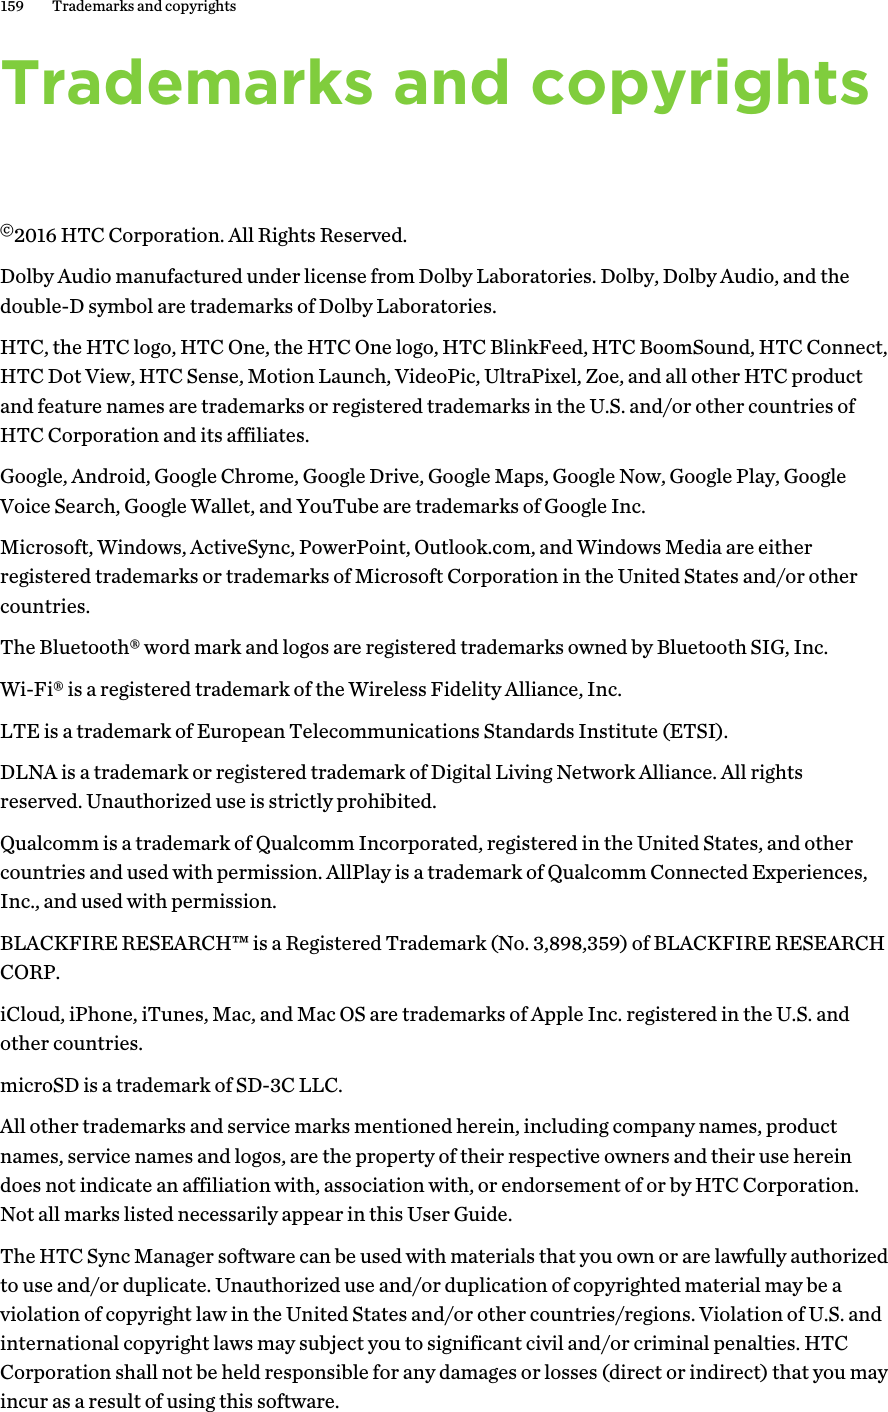 Trademarks and copyrights©2016 HTC Corporation. All Rights Reserved.Dolby Audio manufactured under license from Dolby Laboratories. Dolby, Dolby Audio, and thedouble-D symbol are trademarks of Dolby Laboratories.HTC, the HTC logo, HTC One, the HTC One logo, HTC BlinkFeed, HTC BoomSound, HTC Connect,HTC Dot View, HTC Sense, Motion Launch, VideoPic, UltraPixel, Zoe, and all other HTC productand feature names are trademarks or registered trademarks in the U.S. and/or other countries ofHTC Corporation and its affiliates.Google, Android, Google Chrome, Google Drive, Google Maps, Google Now, Google Play, GoogleVoice Search, Google Wallet, and YouTube are trademarks of Google Inc.Microsoft, Windows, ActiveSync, PowerPoint, Outlook.com, and Windows Media are eitherregistered trademarks or trademarks of Microsoft Corporation in the United States and/or othercountries.The Bluetooth® word mark and logos are registered trademarks owned by Bluetooth SIG, Inc.Wi-Fi® is a registered trademark of the Wireless Fidelity Alliance, Inc.LTE is a trademark of European Telecommunications Standards Institute (ETSI).DLNA is a trademark or registered trademark of Digital Living Network Alliance. All rightsreserved. Unauthorized use is strictly prohibited.Qualcomm is a trademark of Qualcomm Incorporated, registered in the United States, and othercountries and used with permission. AllPlay is a trademark of Qualcomm Connected Experiences,Inc., and used with permission.BLACKFIRE RESEARCH™ is a Registered Trademark (No. 3,898,359) of BLACKFIRE RESEARCHCORP.iCloud, iPhone, iTunes, Mac, and Mac OS are trademarks of Apple Inc. registered in the U.S. andother countries.microSD is a trademark of SD-3C LLC.All other trademarks and service marks mentioned herein, including company names, productnames, service names and logos, are the property of their respective owners and their use hereindoes not indicate an affiliation with, association with, or endorsement of or by HTC Corporation.Not all marks listed necessarily appear in this User Guide.The HTC Sync Manager software can be used with materials that you own or are lawfully authorizedto use and/or duplicate. Unauthorized use and/or duplication of copyrighted material may be aviolation of copyright law in the United States and/or other countries/regions. Violation of U.S. andinternational copyright laws may subject you to significant civil and/or criminal penalties. HTCCorporation shall not be held responsible for any damages or losses (direct or indirect) that you mayincur as a result of using this software.159 Trademarks and copyrights